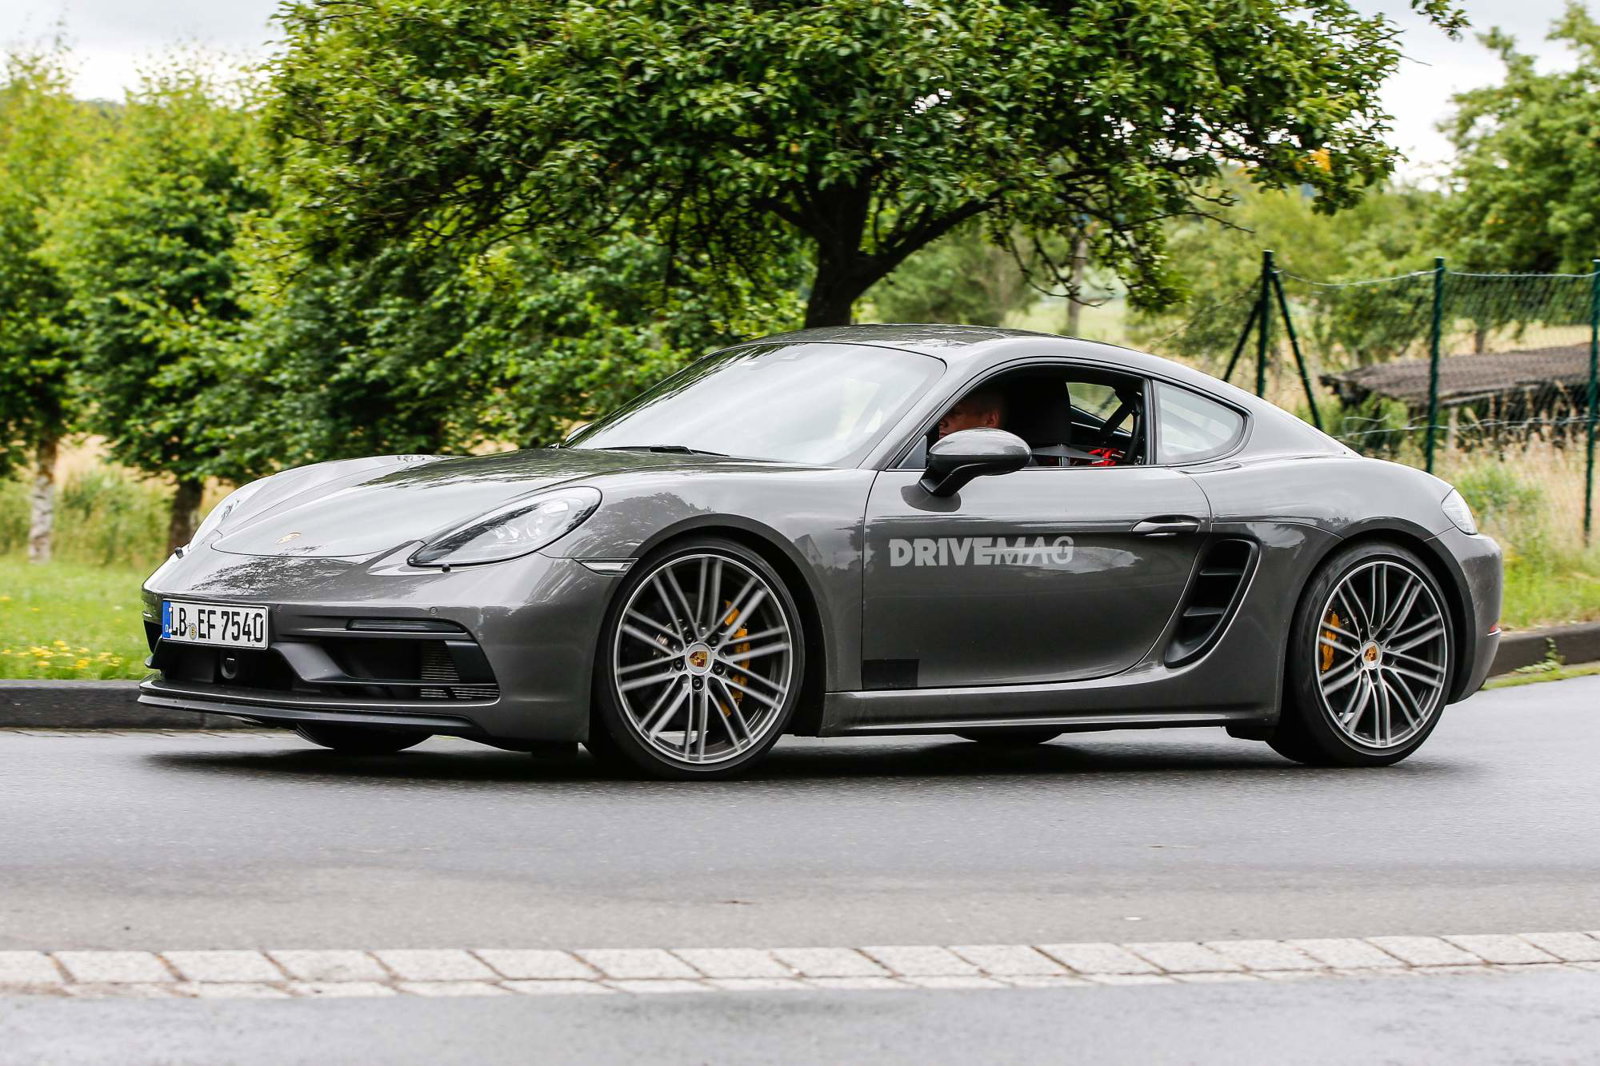 2018 Porsche 718 Cayman GTS is not shy to show its stronger muscles